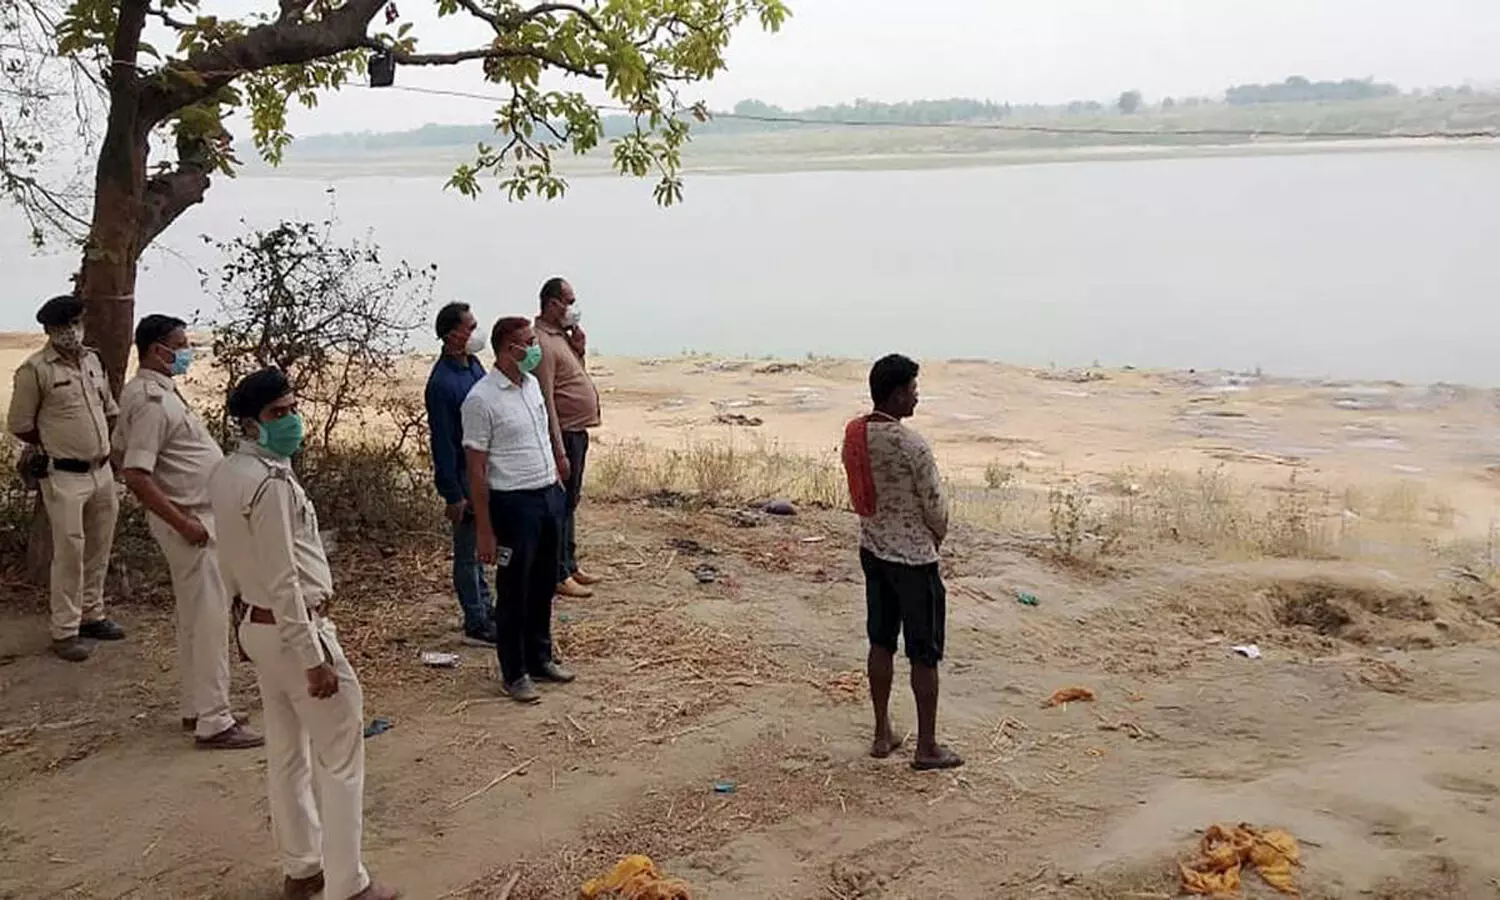 2,000 dead bodies found floating in Ganga River; panel asks UP, Bihar for report on dumping